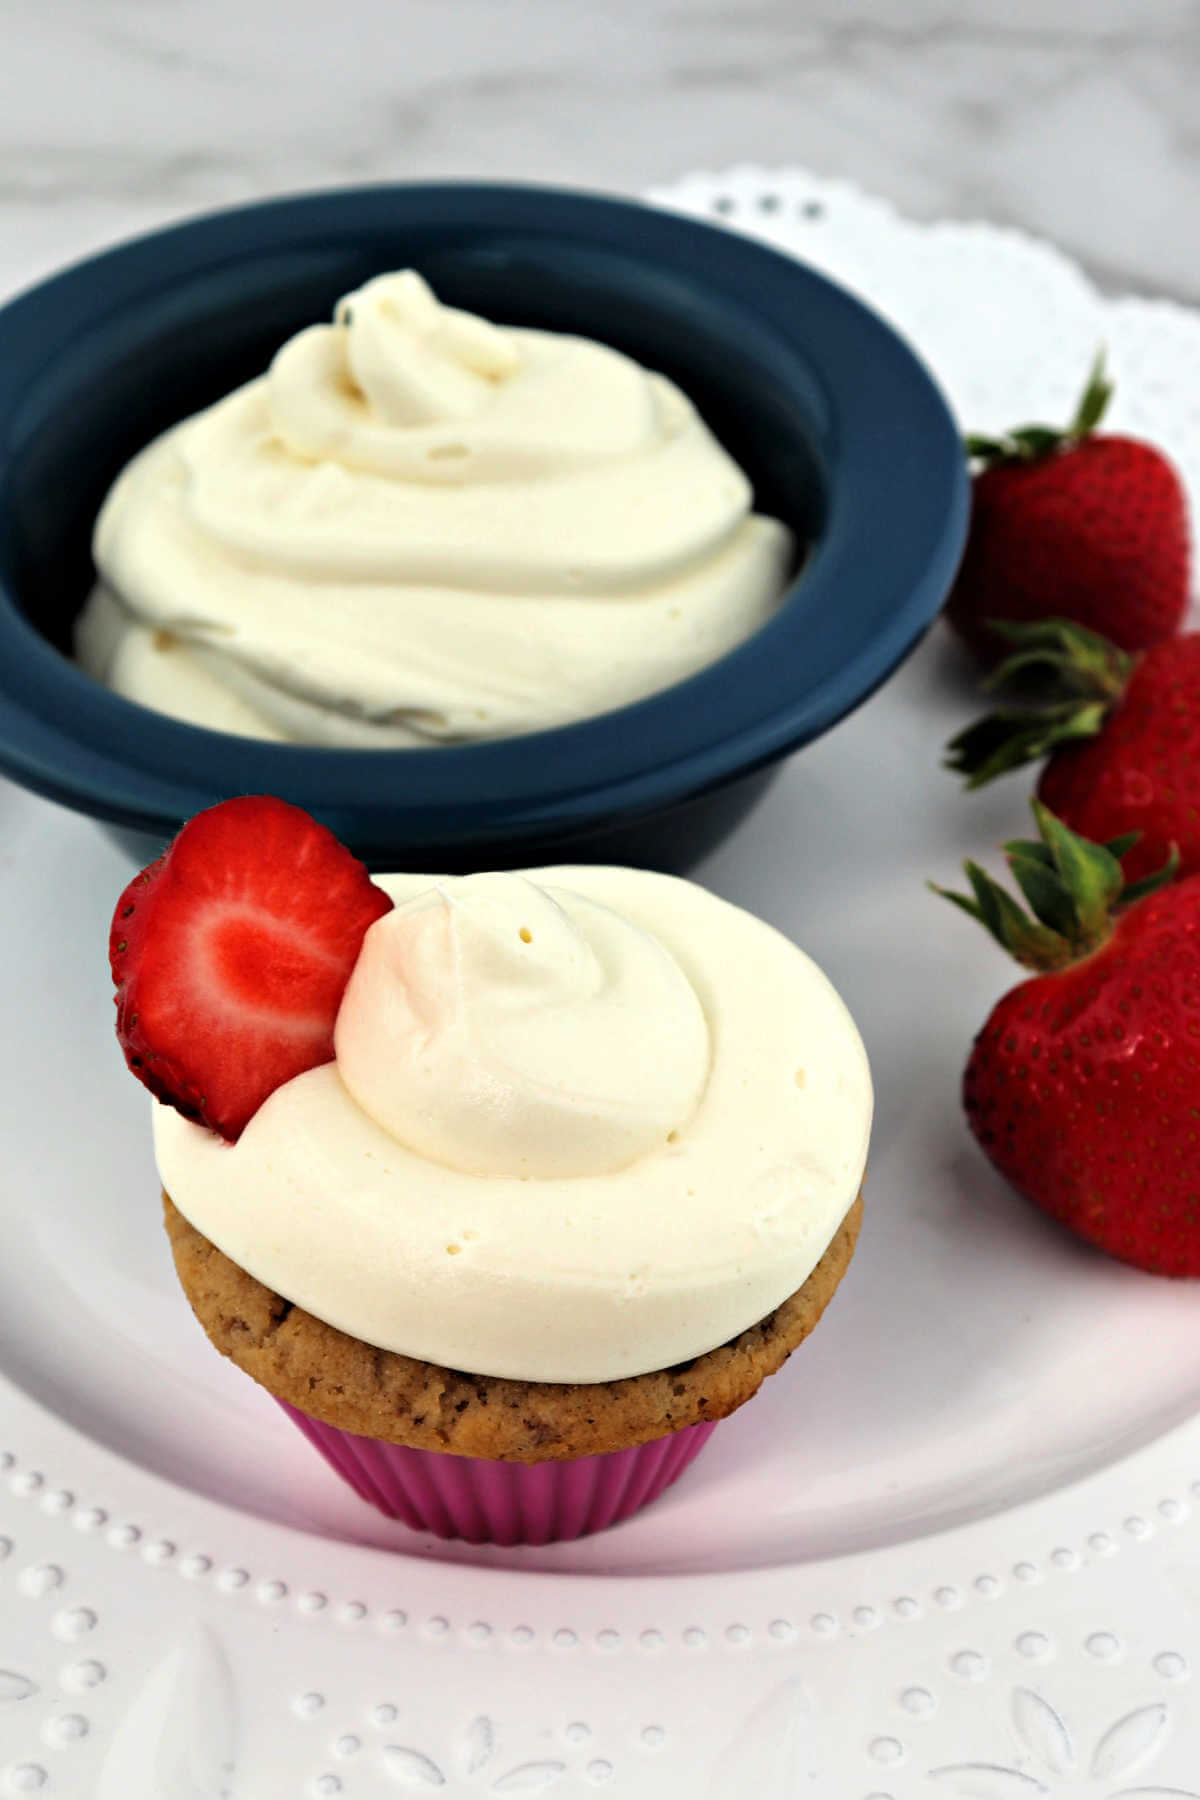 Easy Keto Cream Cheese Frosting